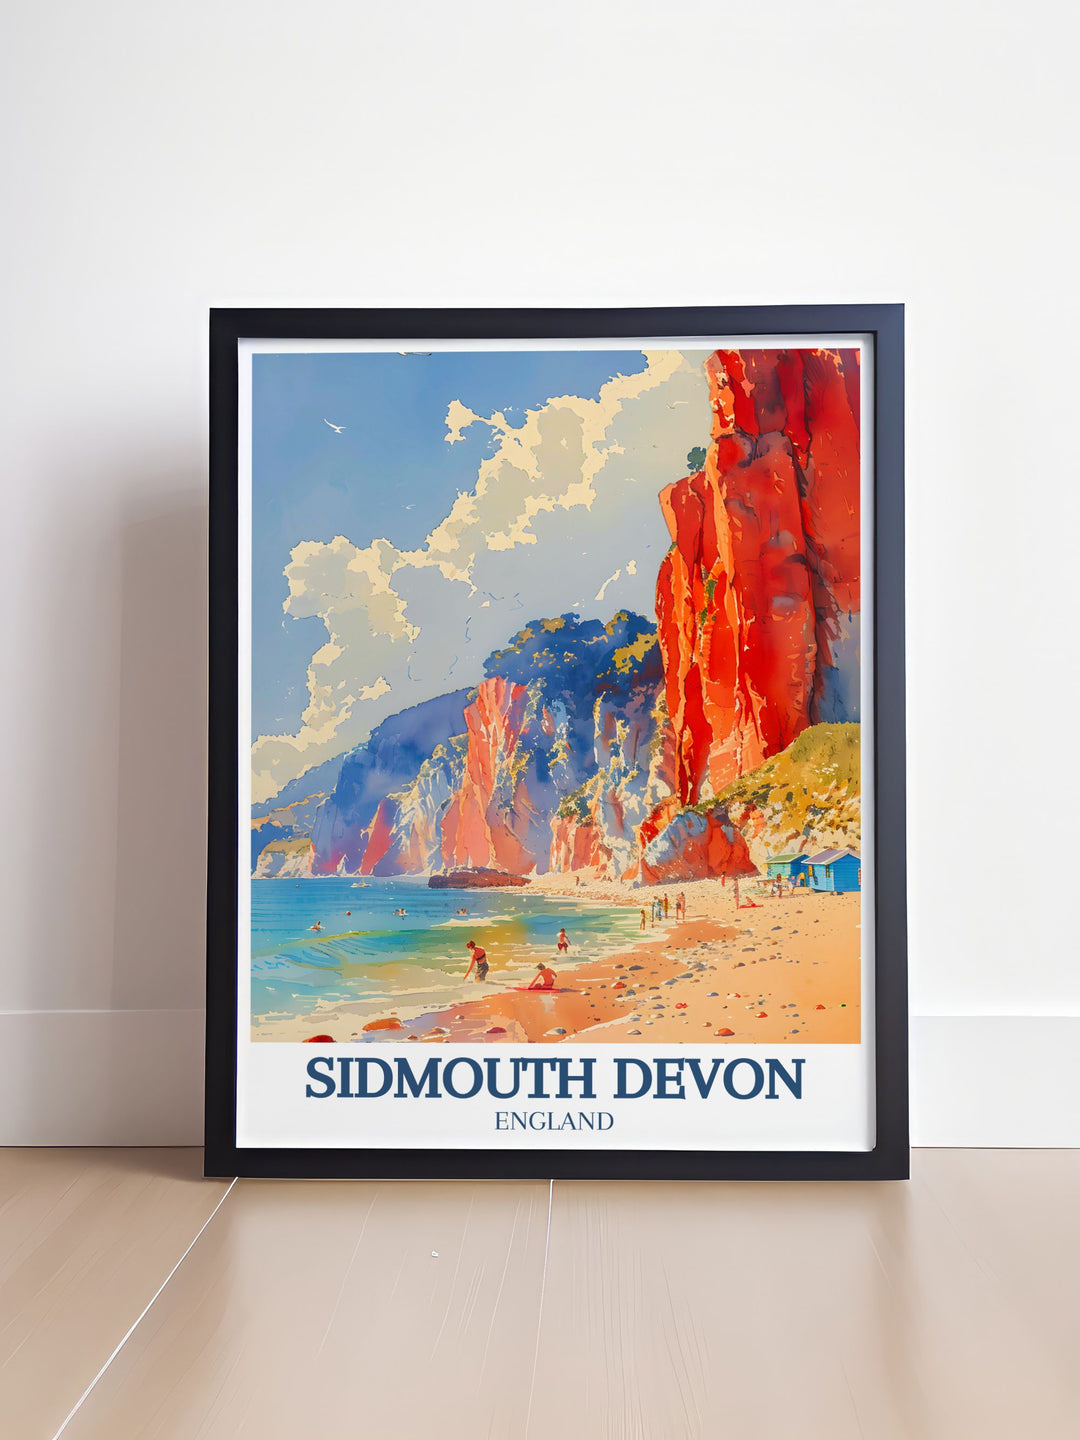 This travel poster highlights Sidmouth Beach in Devon, inviting viewers to imagine a tranquil day by the sea, with soft sand and gentle waves creating a serene escape, ideal for those who love seaside getaways.